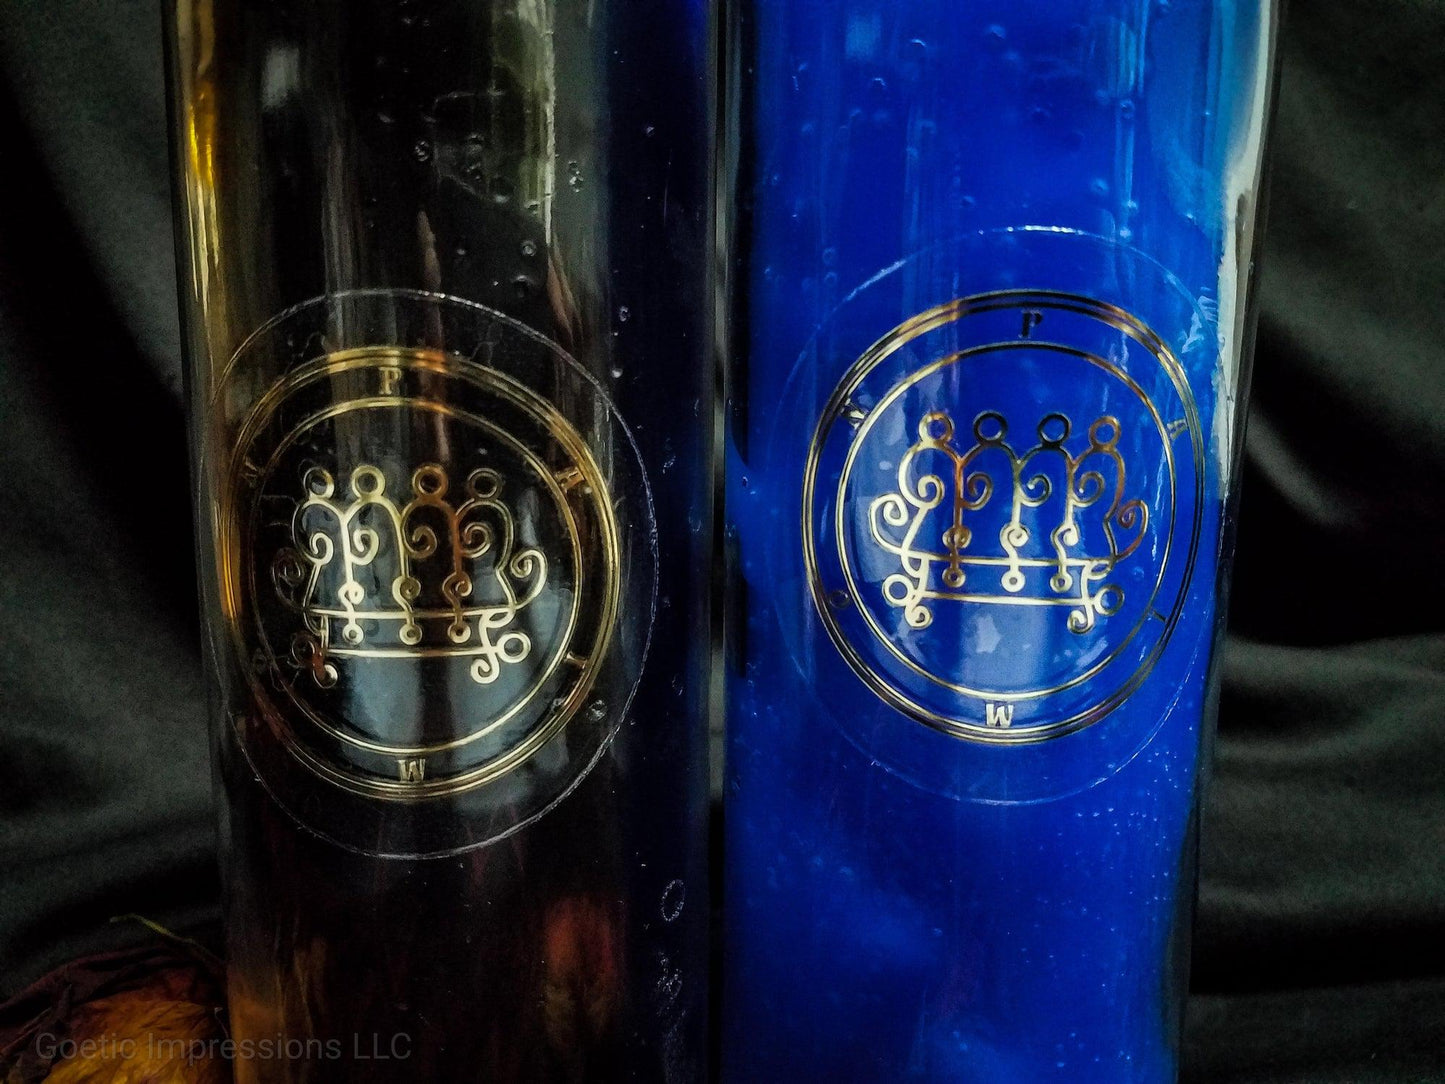 Gold Paimon sigil on black and blue 7 day candles